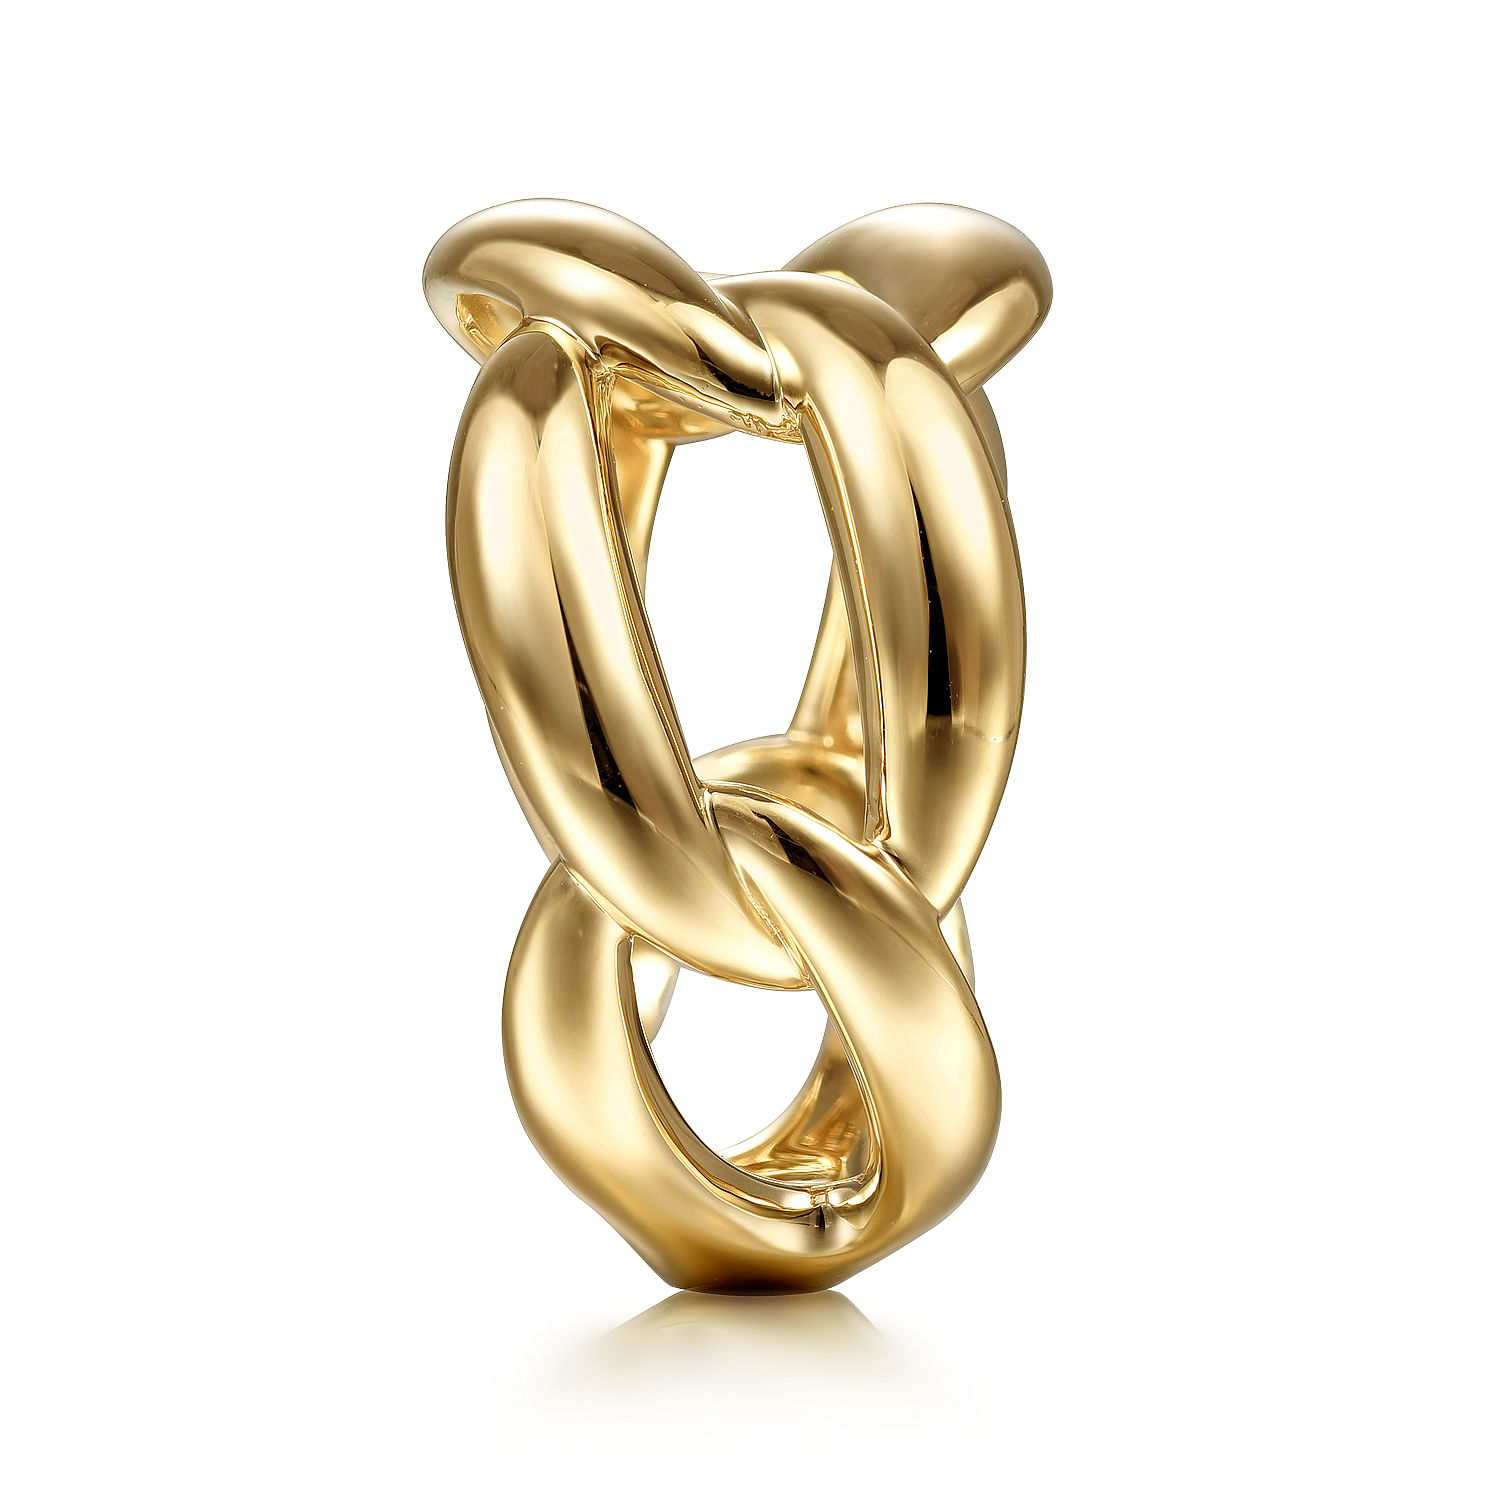 14K Yellow Gold Link Chain Wide Band Ring